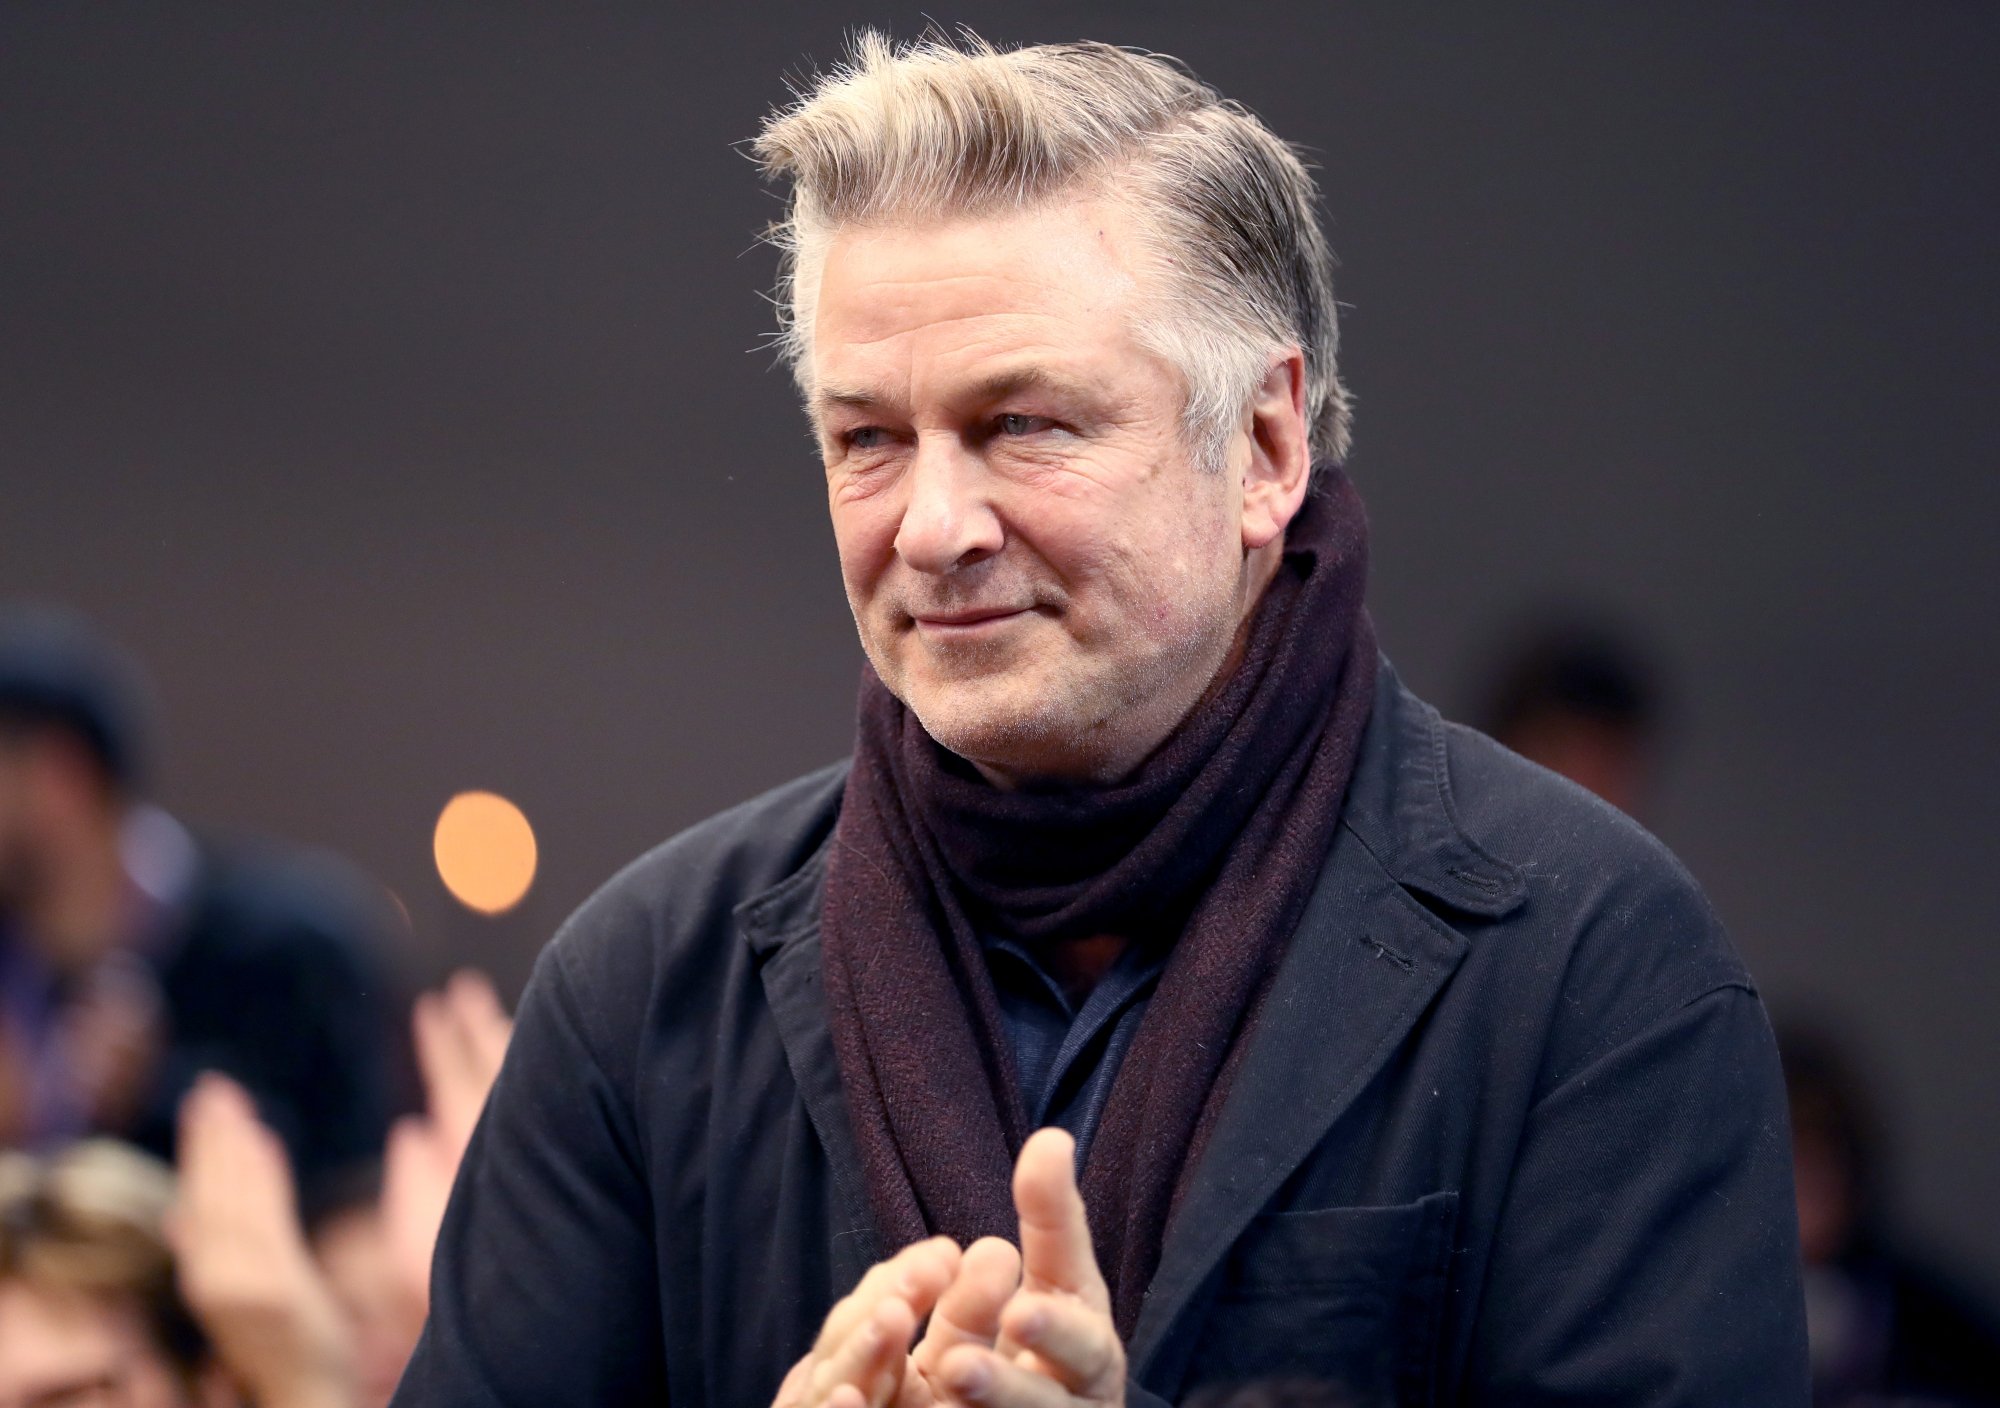 'Saturday Night Live' host Alec Baldwin at the Sundance Film Festival wearing a dark scarf and jacket.